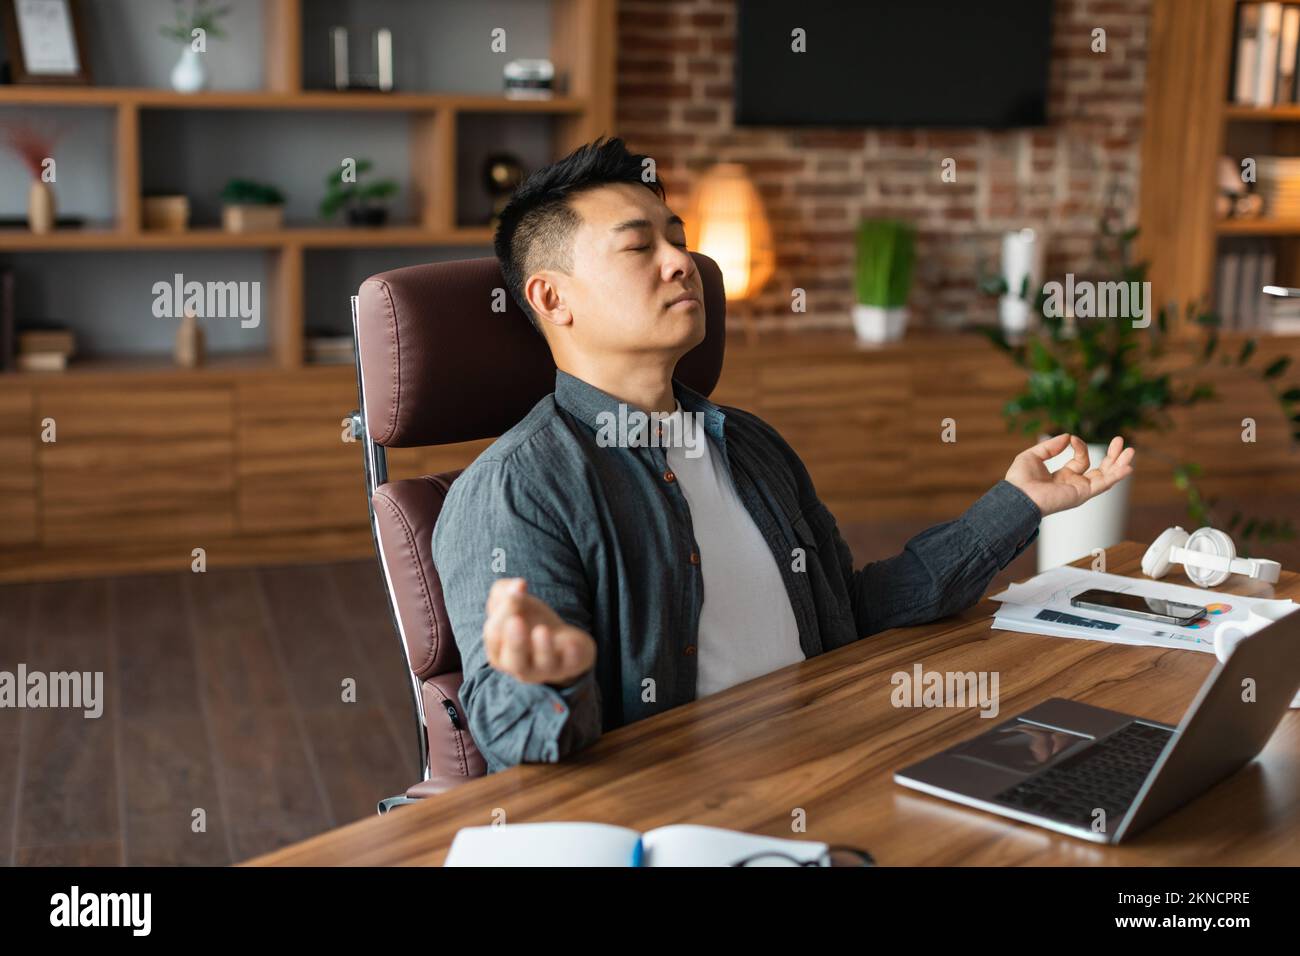 Relaxed adult asian man with closed eyes meditation, rests at table with laptop, enjoys silence and comfort Stock Photo